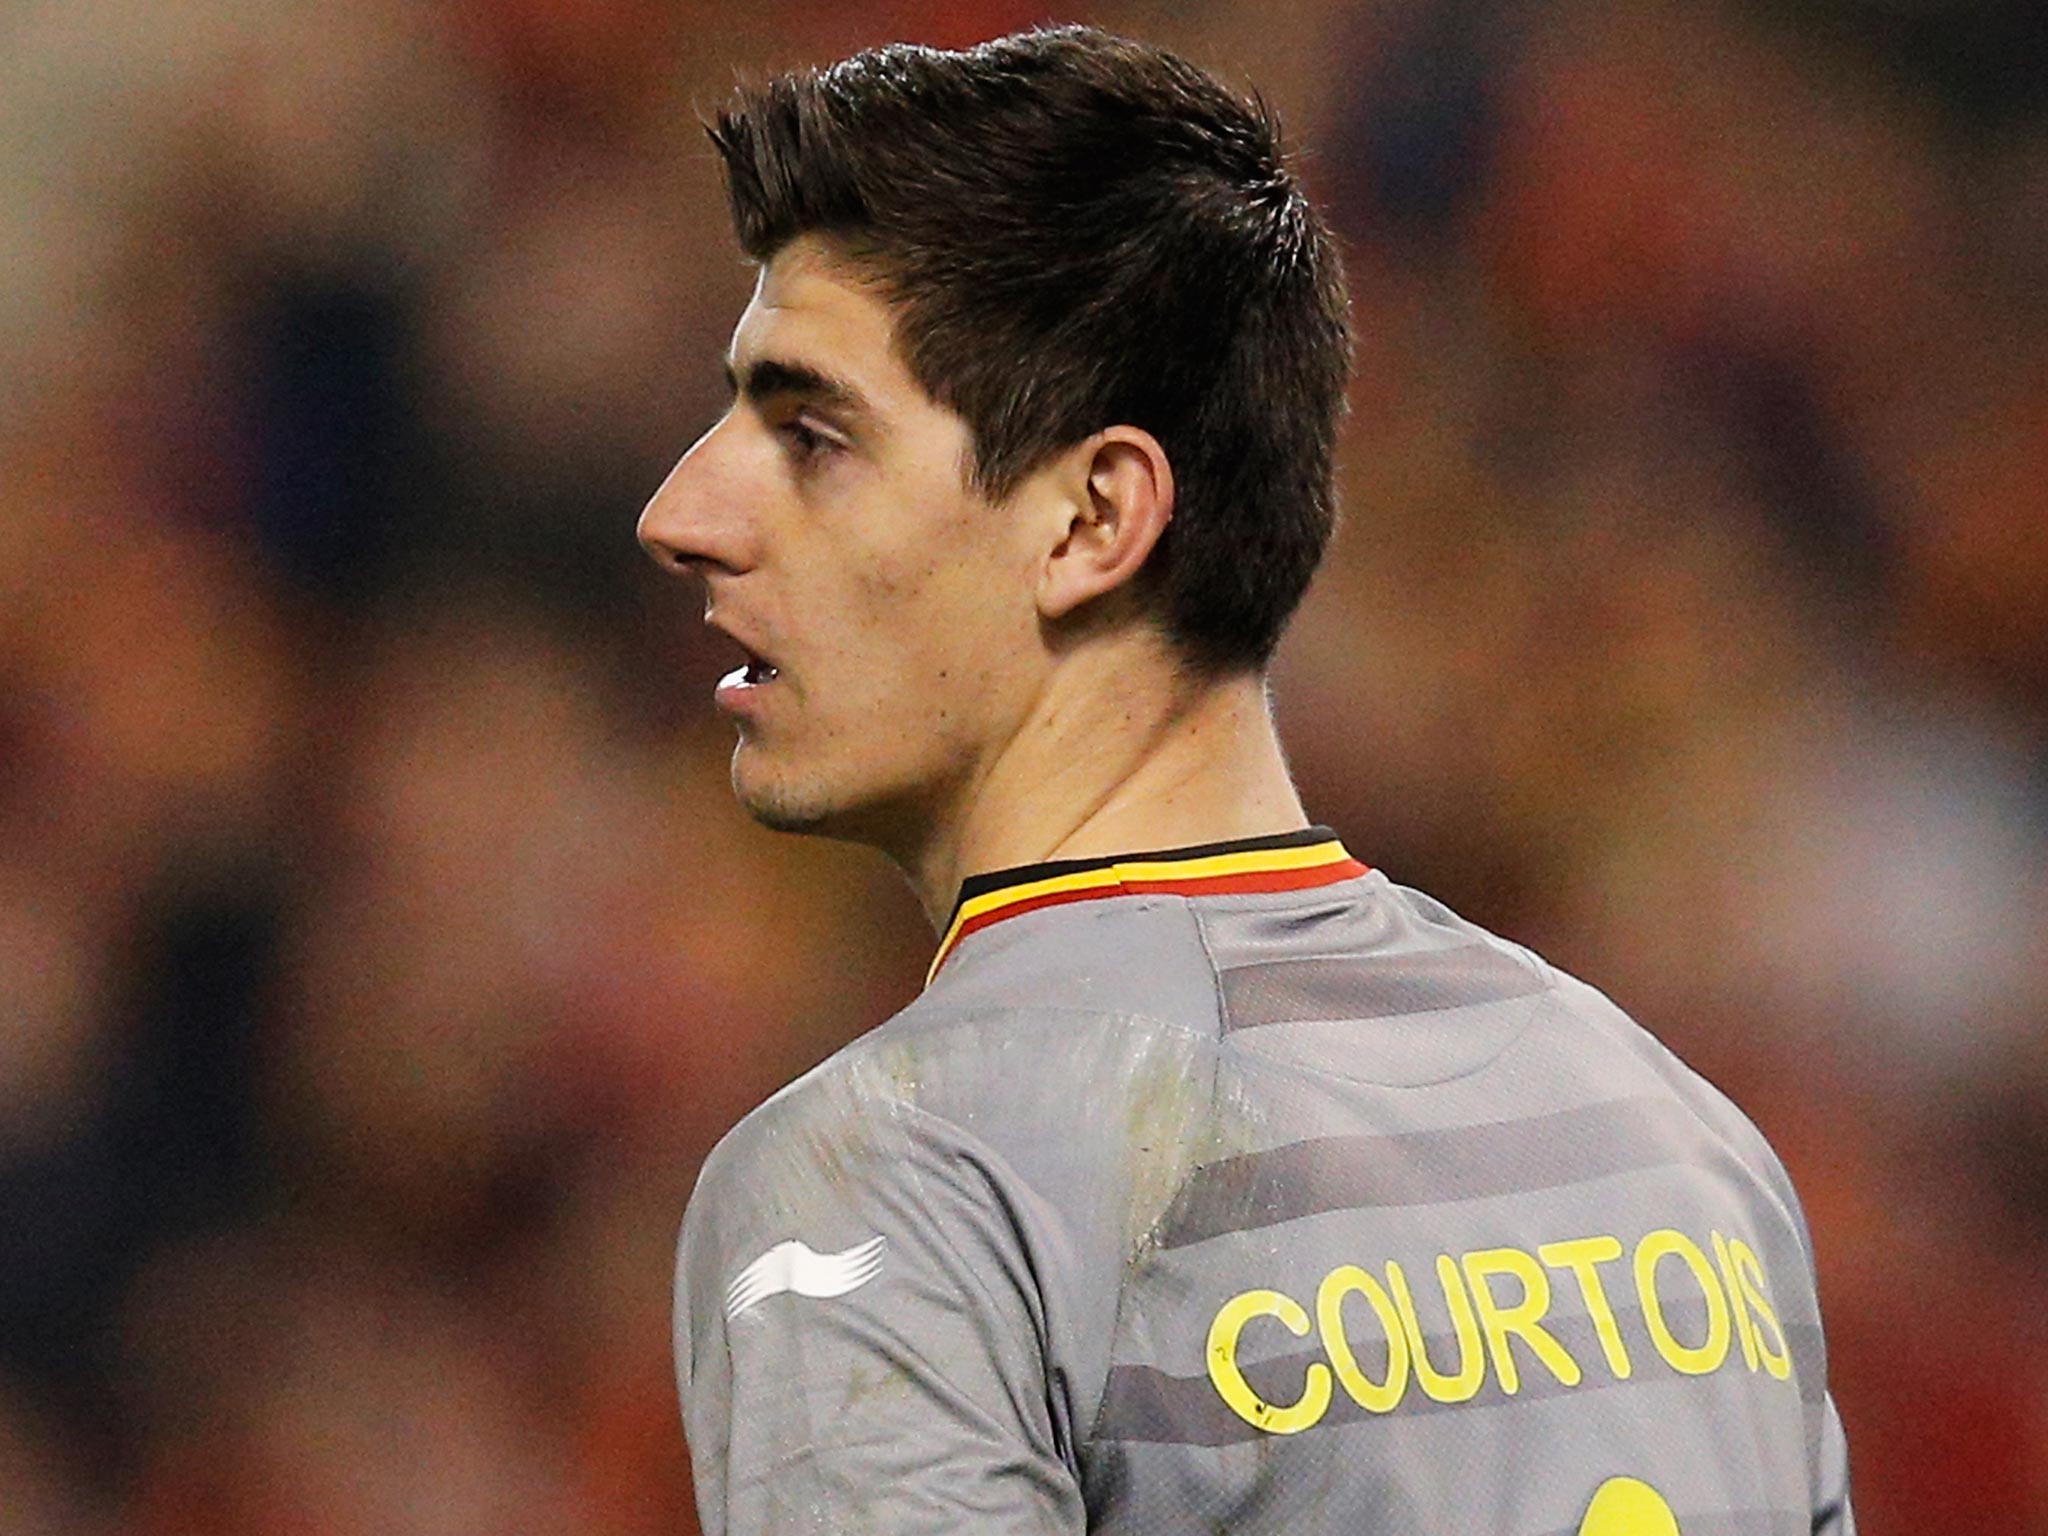 Chelsea are increasing attempts to convince Thibault Coirtois his future lies at Stamford Bridge